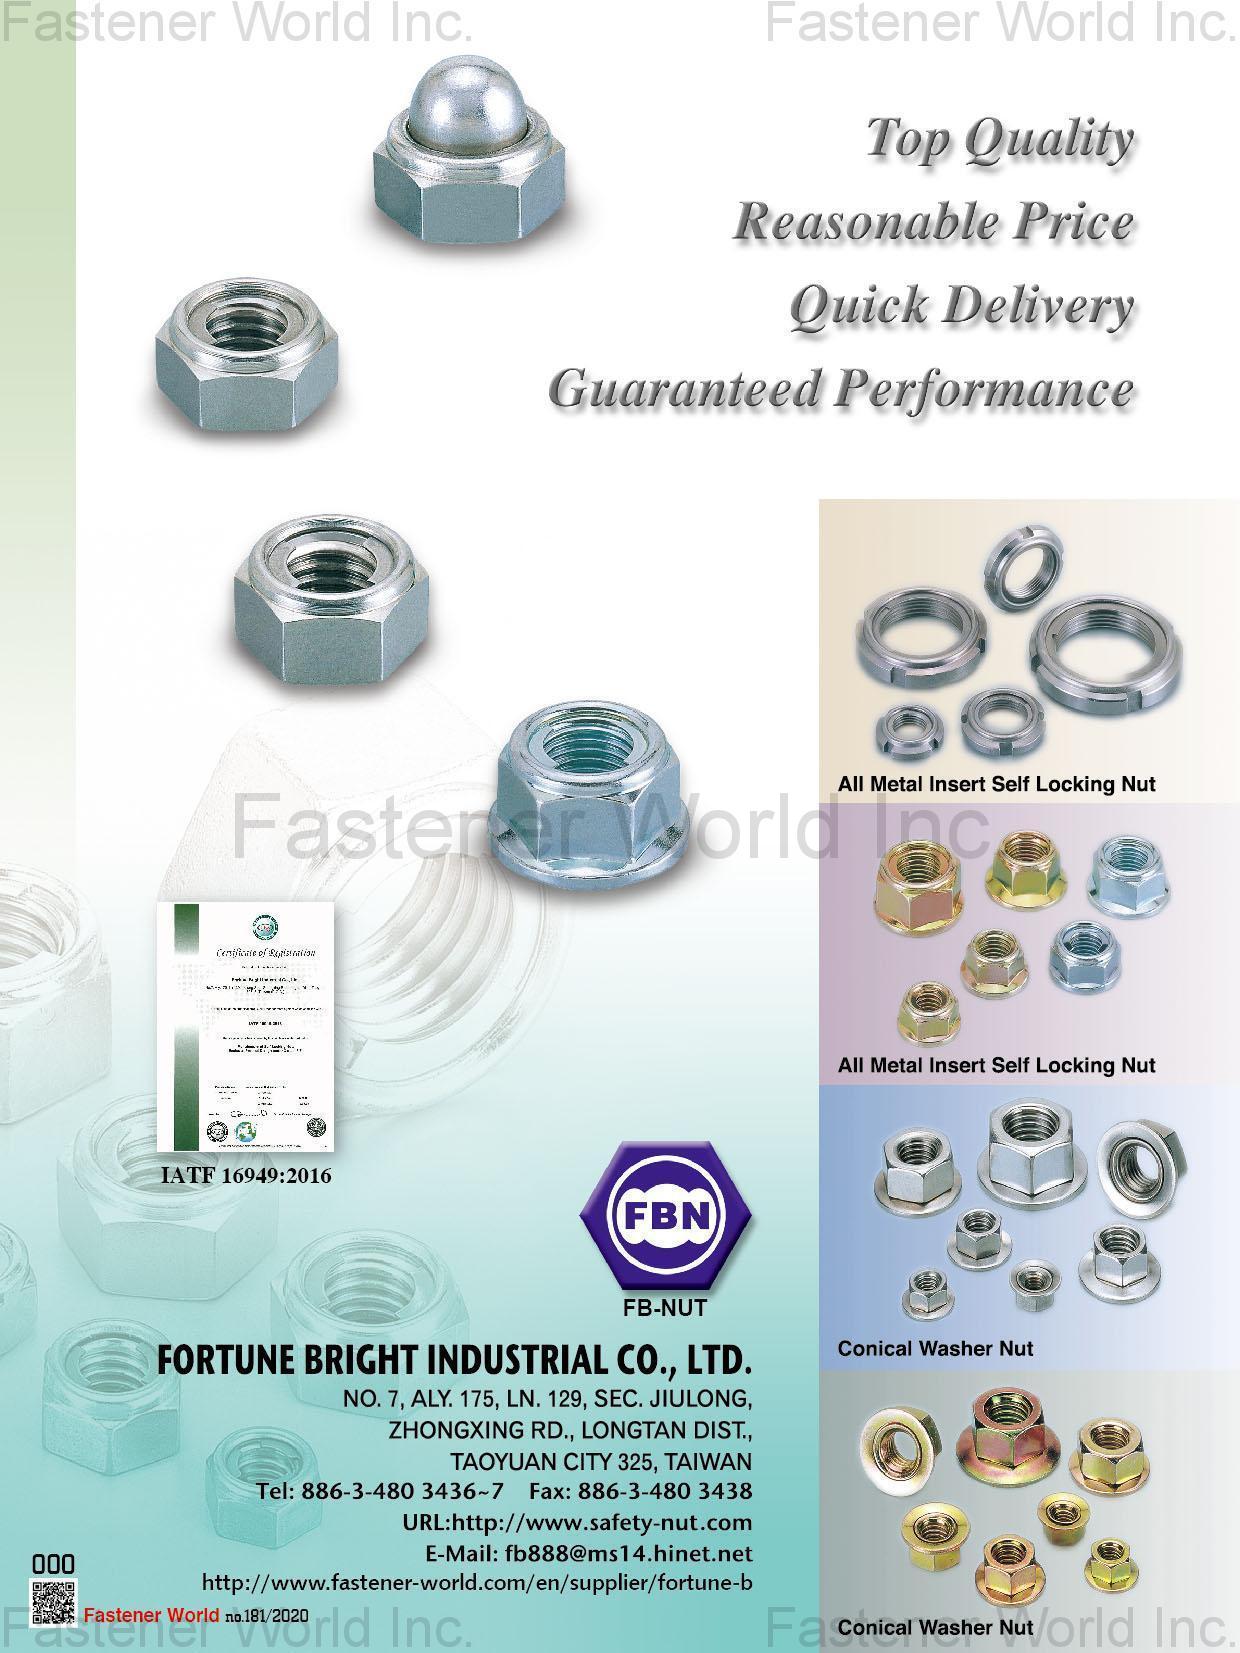  All Metal Insert Self Locking Nuts, Conical Washer Nuts